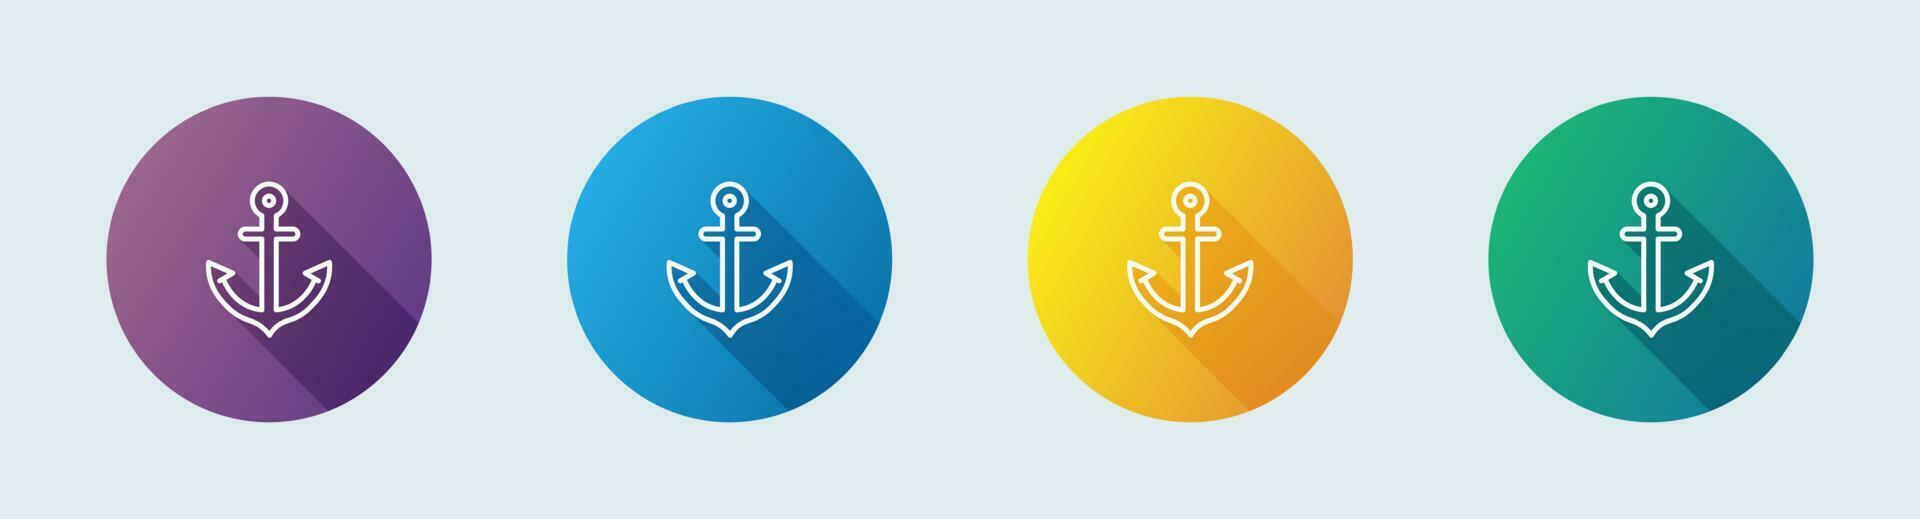 Anchor line icon in flat design style. Nautical signs vector illustration.